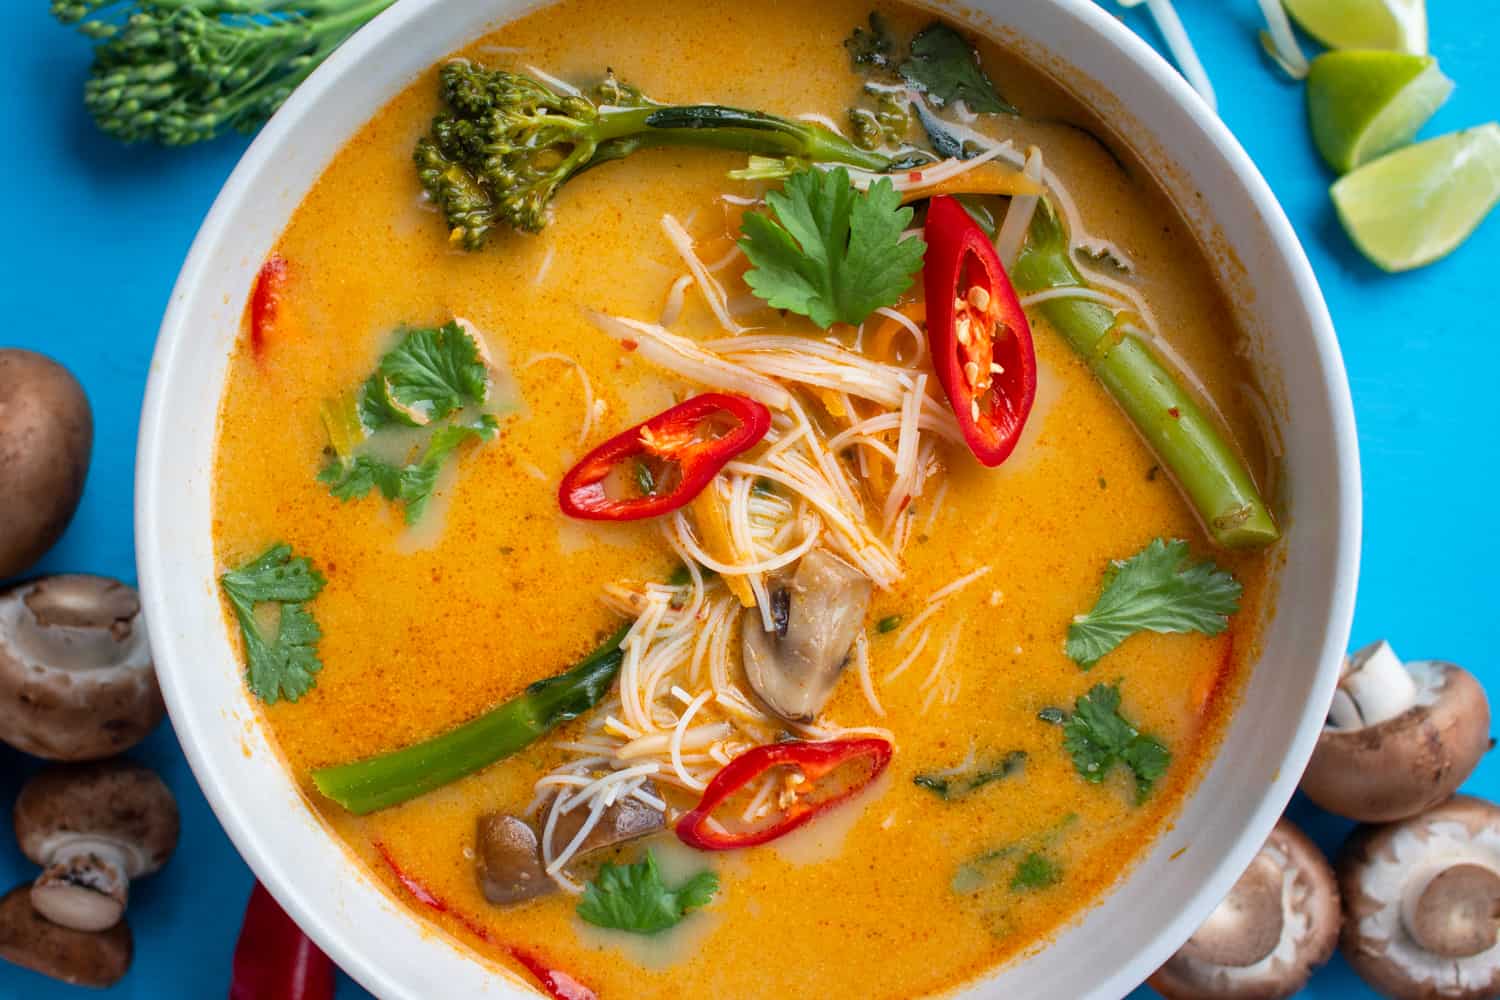 creamy spiced ramen topped with chillies. Vegetables decoratively placed around the bowl